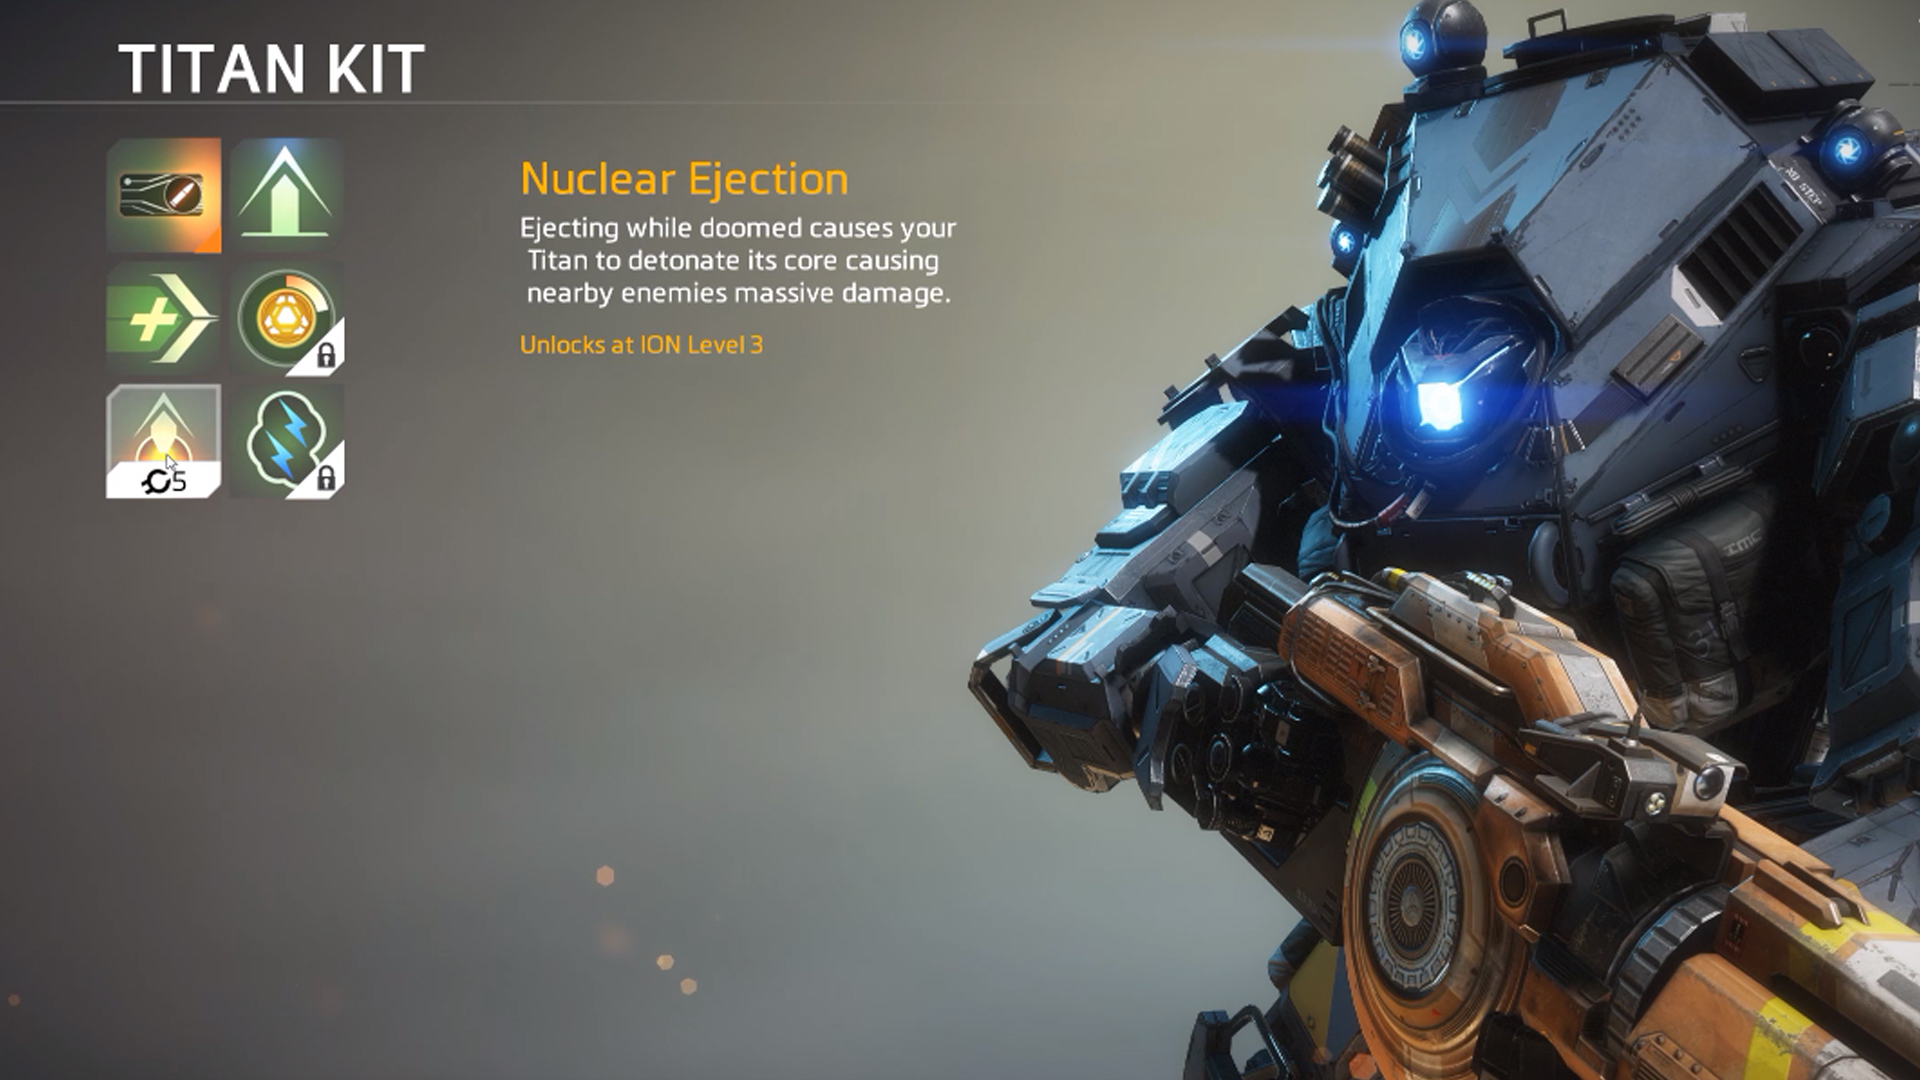 Titan Kit - Nuclear Ejection